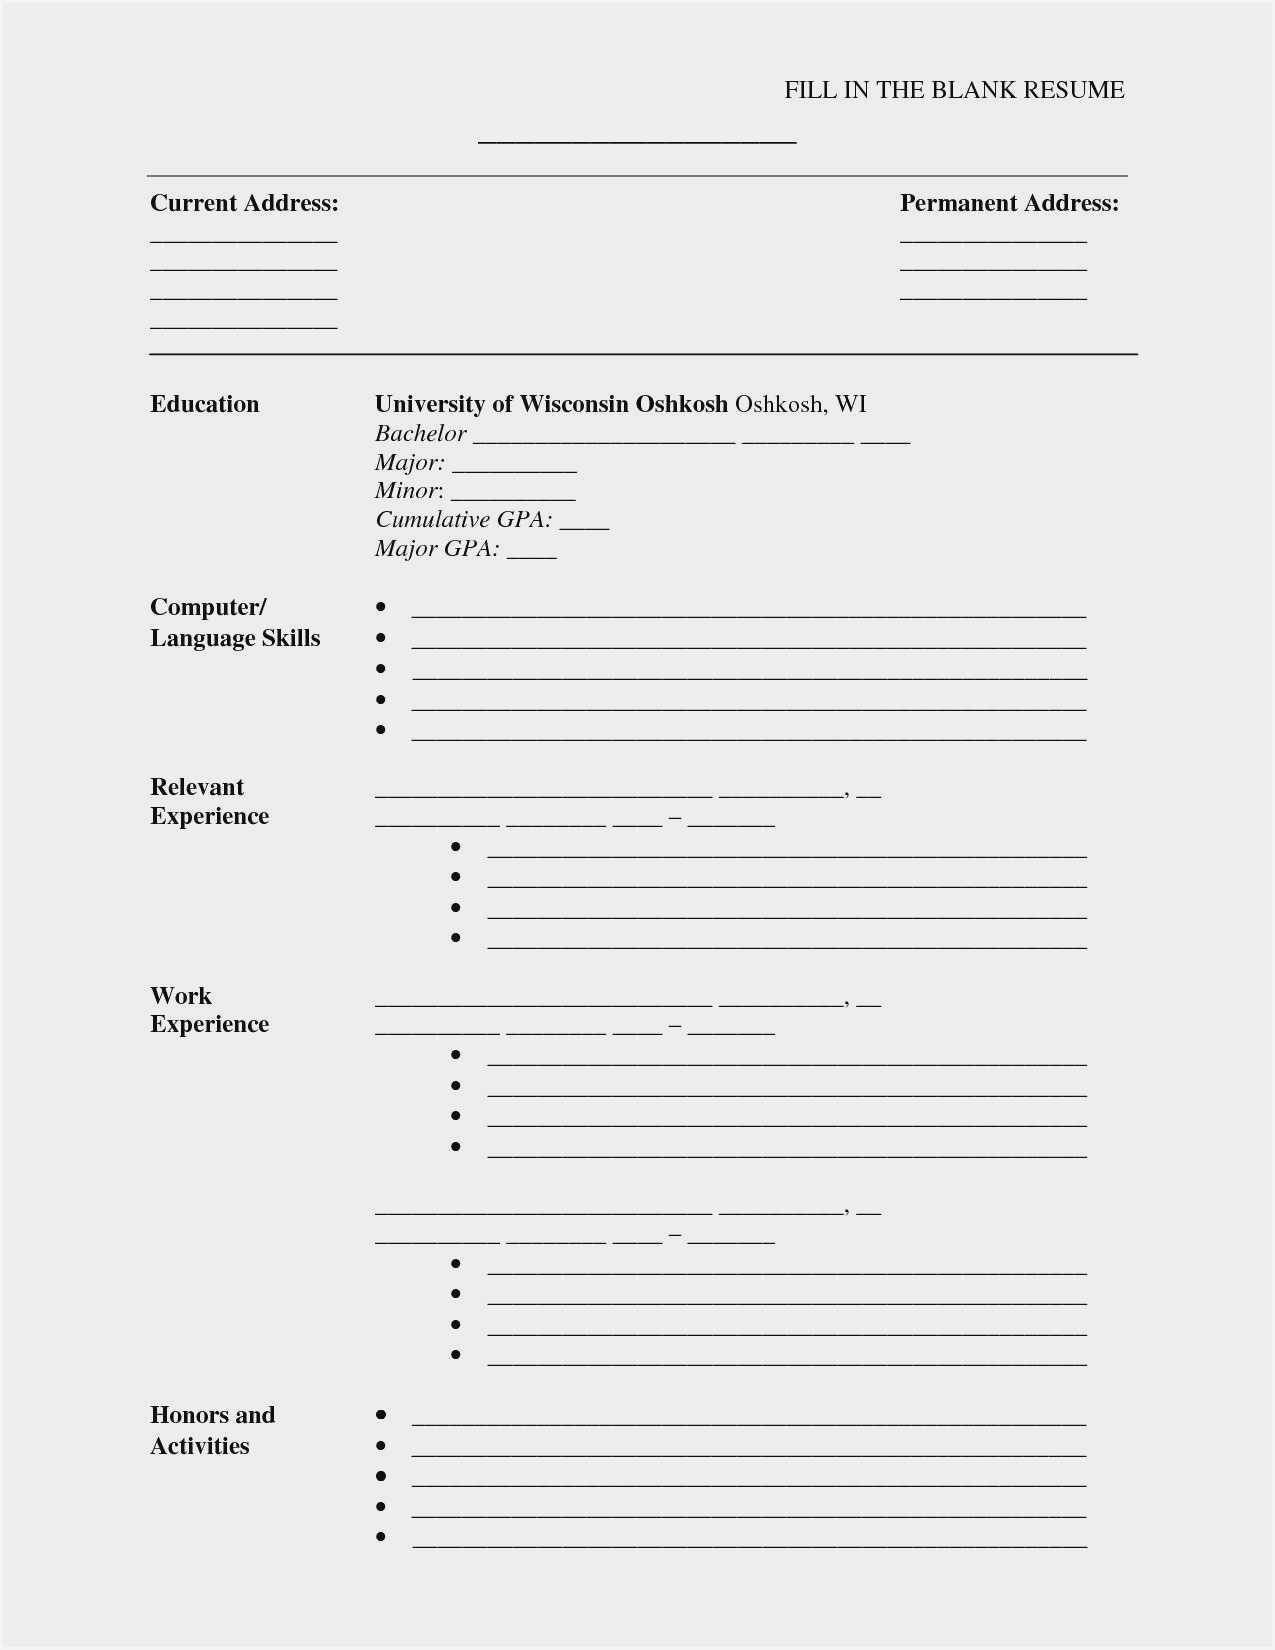 Blank Cv Format Word Download – Resume : Resume Sample #3945 With Free Blank Cv Template Download